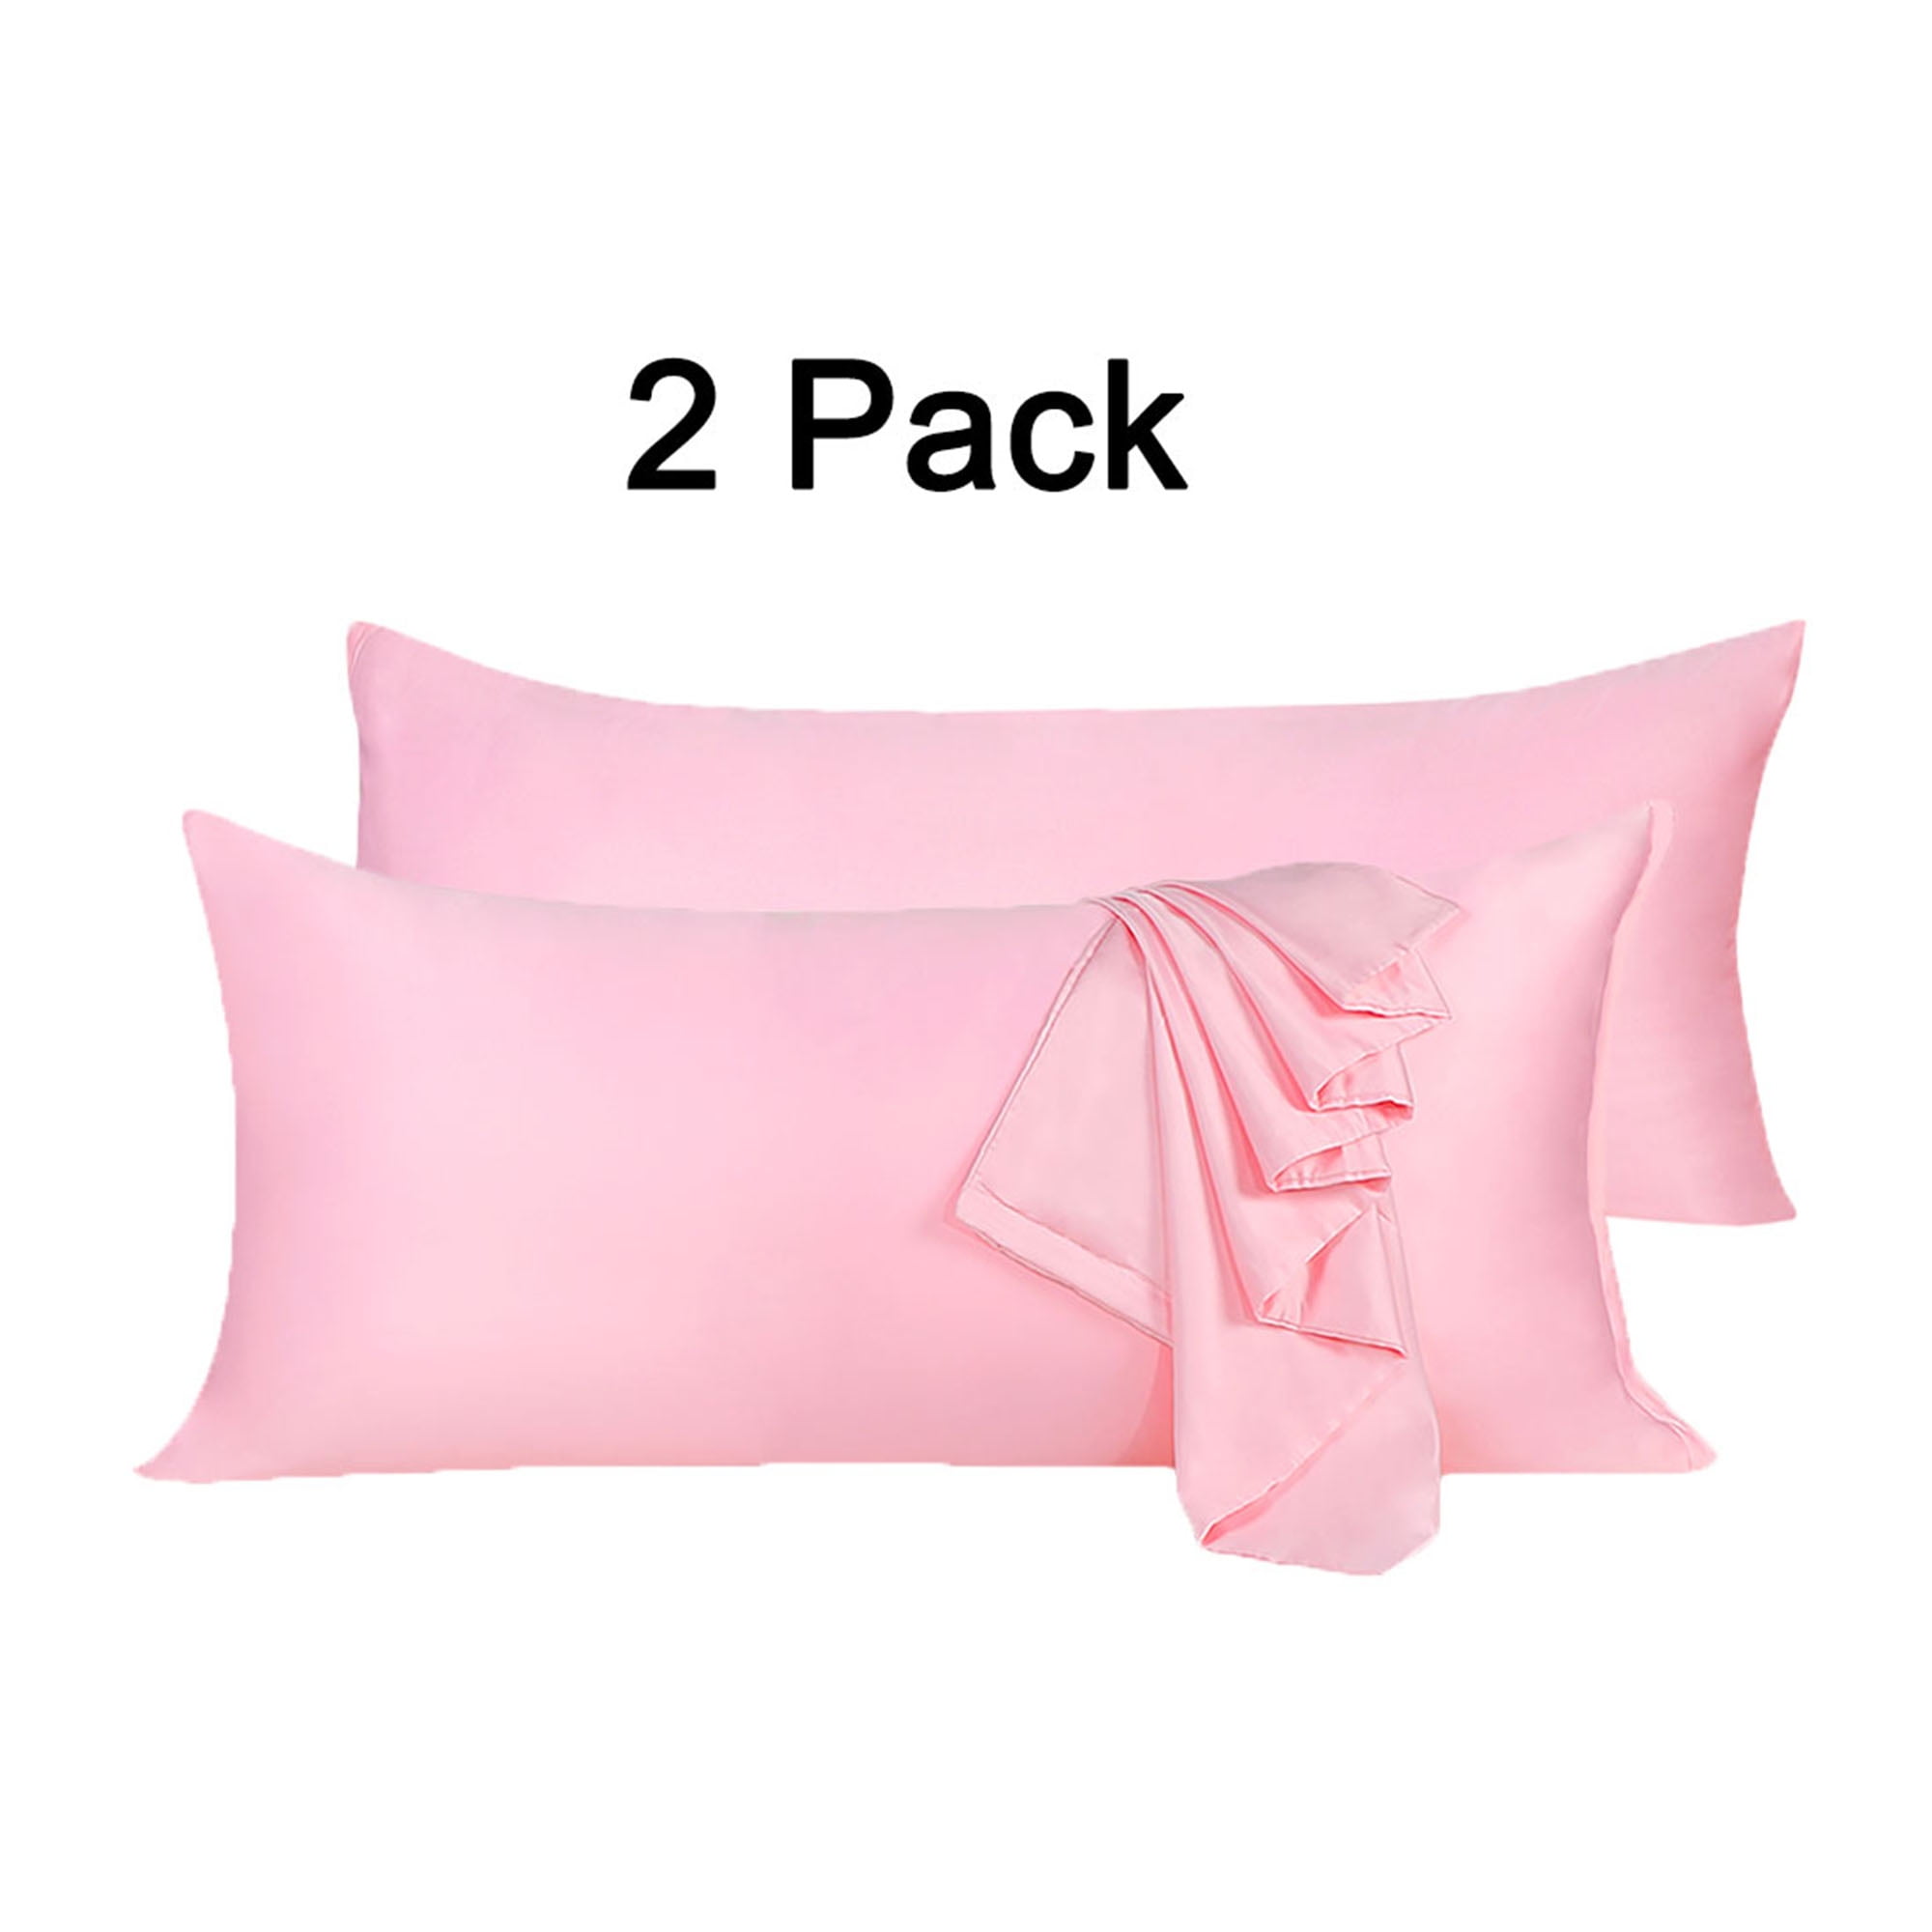 Details about   Zippered Silky Satin Body Pillow Cover Long Pillow Cases Covers 